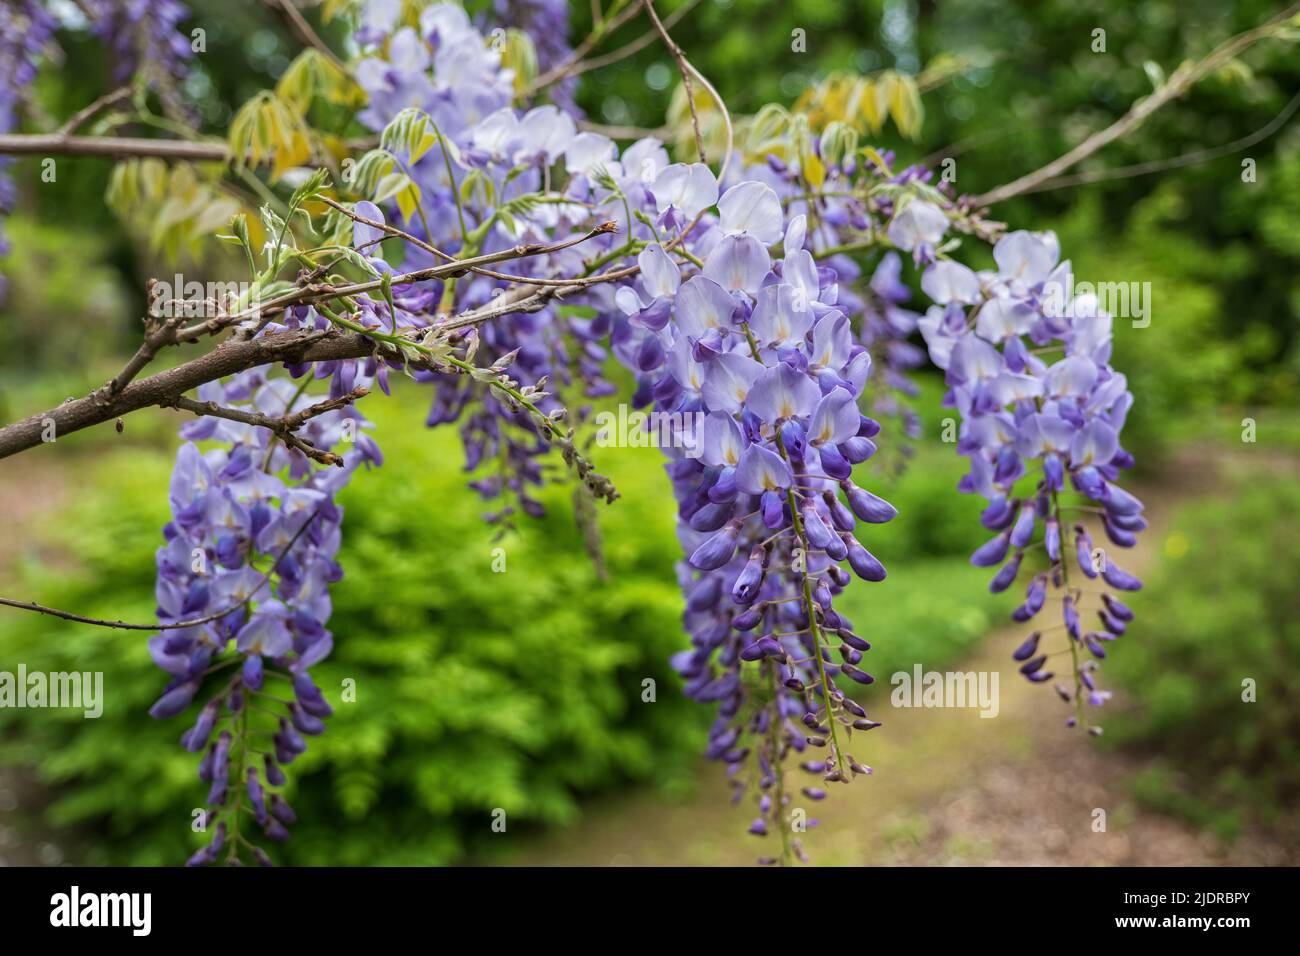 Wisteria sinensis Chinese wisteria lavender blooming flowers, plant in family Fabaceae (pea family), native range: China. Stock Photo